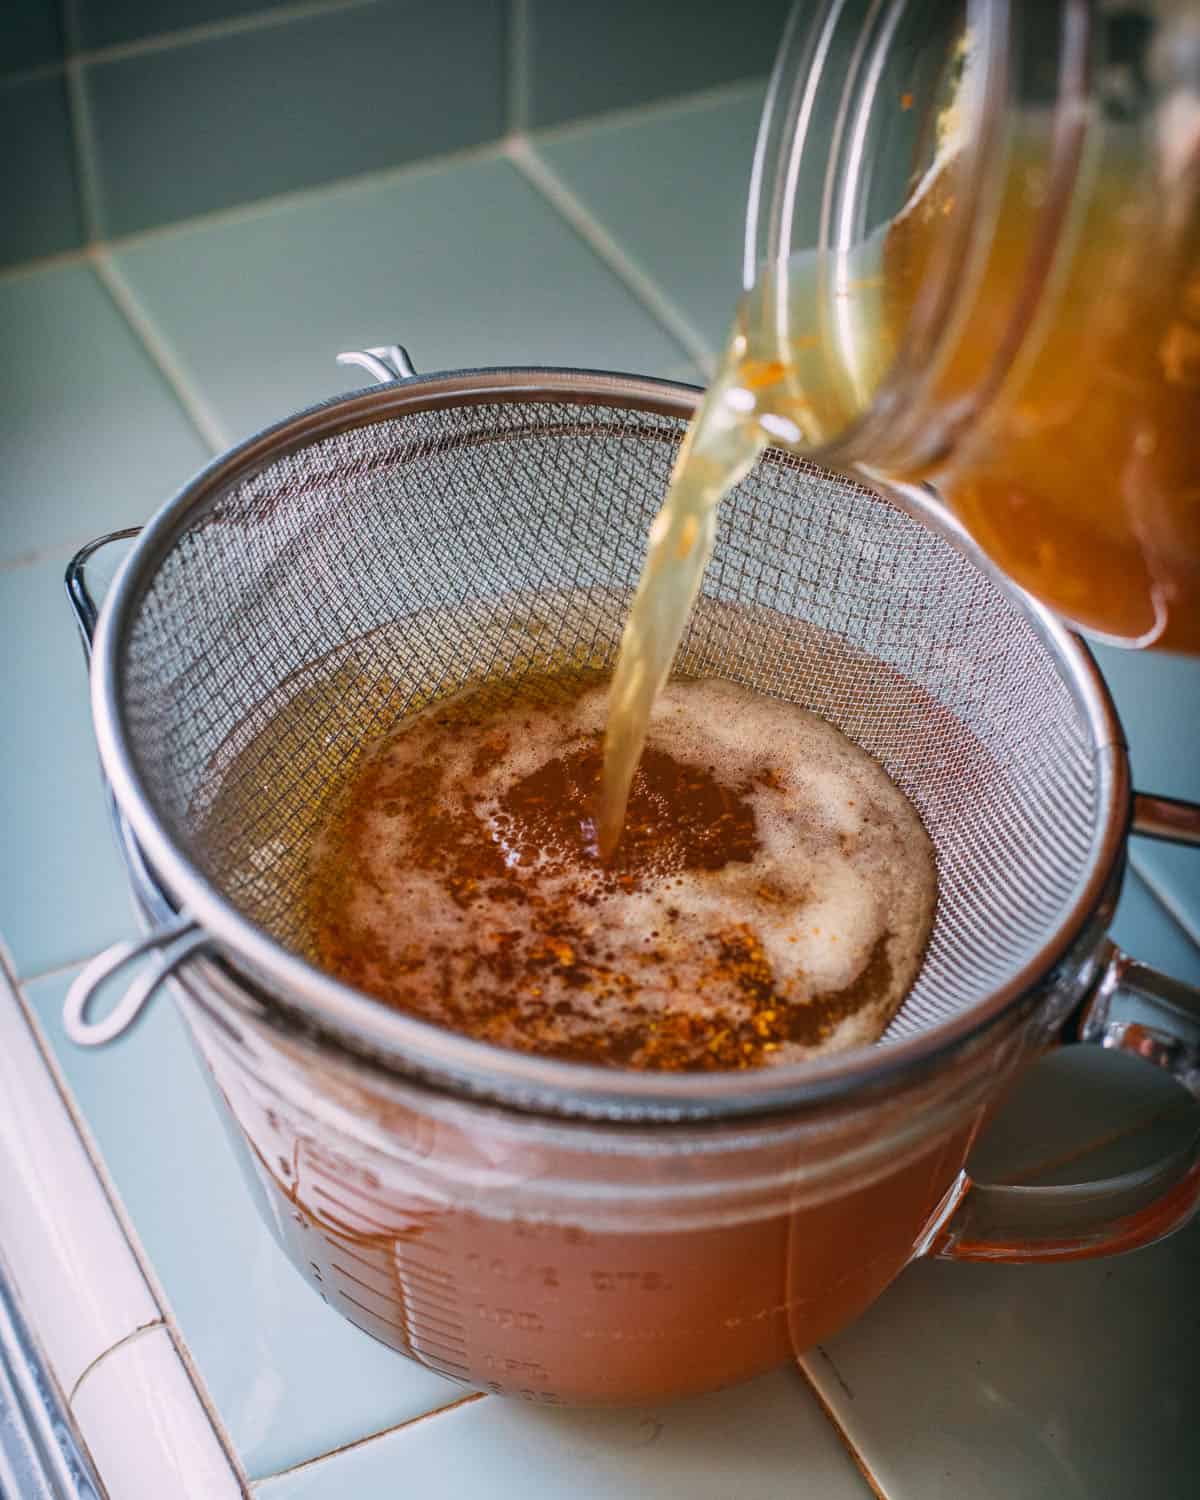 Turmeric soda being poured into a glass jar through a mesh strainer.